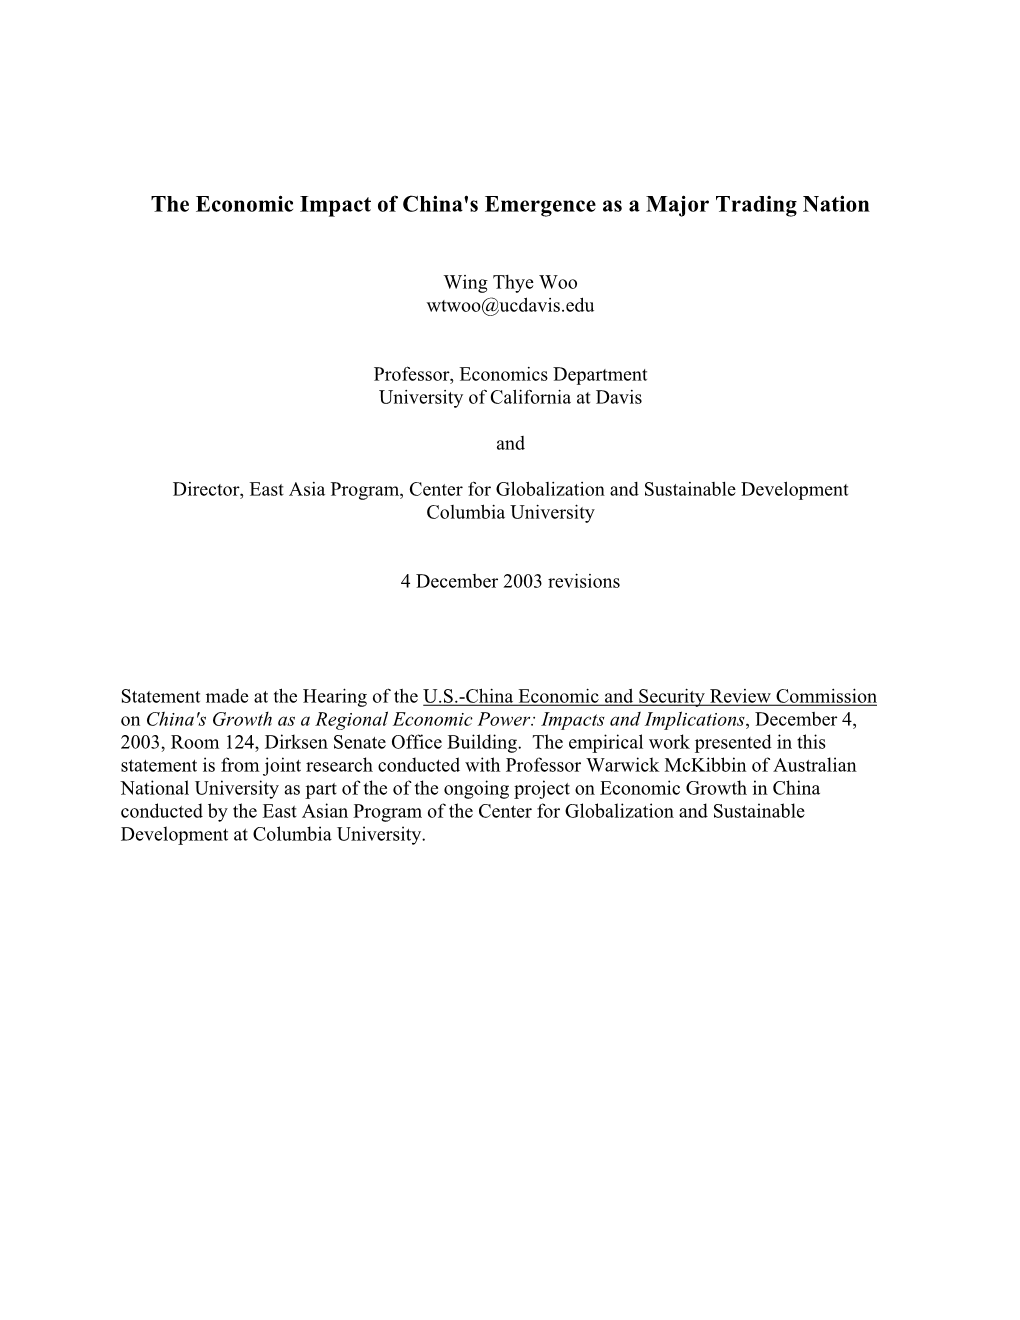 The Economic Impact of China's Emergence As a Major Trading Nation